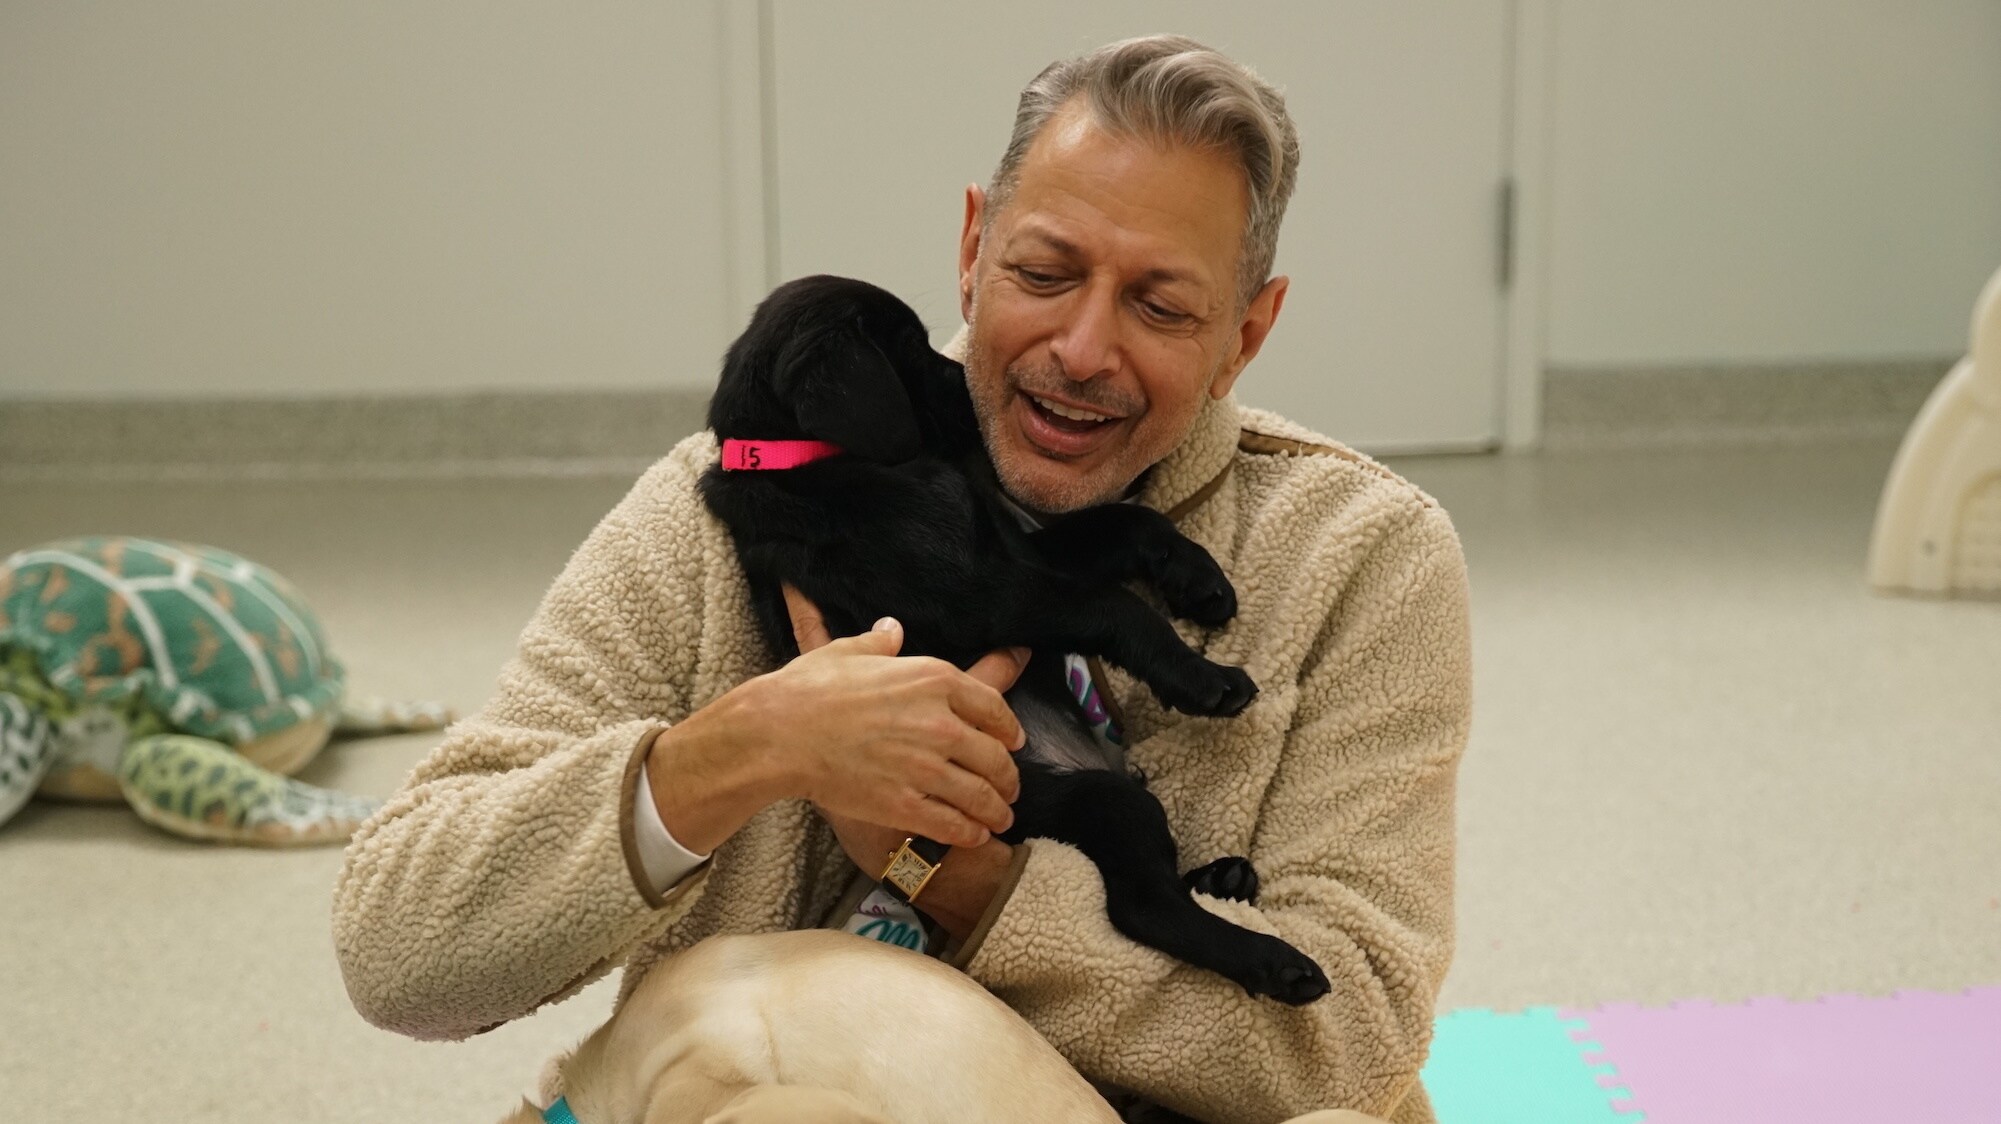 Santa Rosa, CA - Jeff Goldblum sits on the floor with puppies at Canine Companions. (Credit: National Geographic)